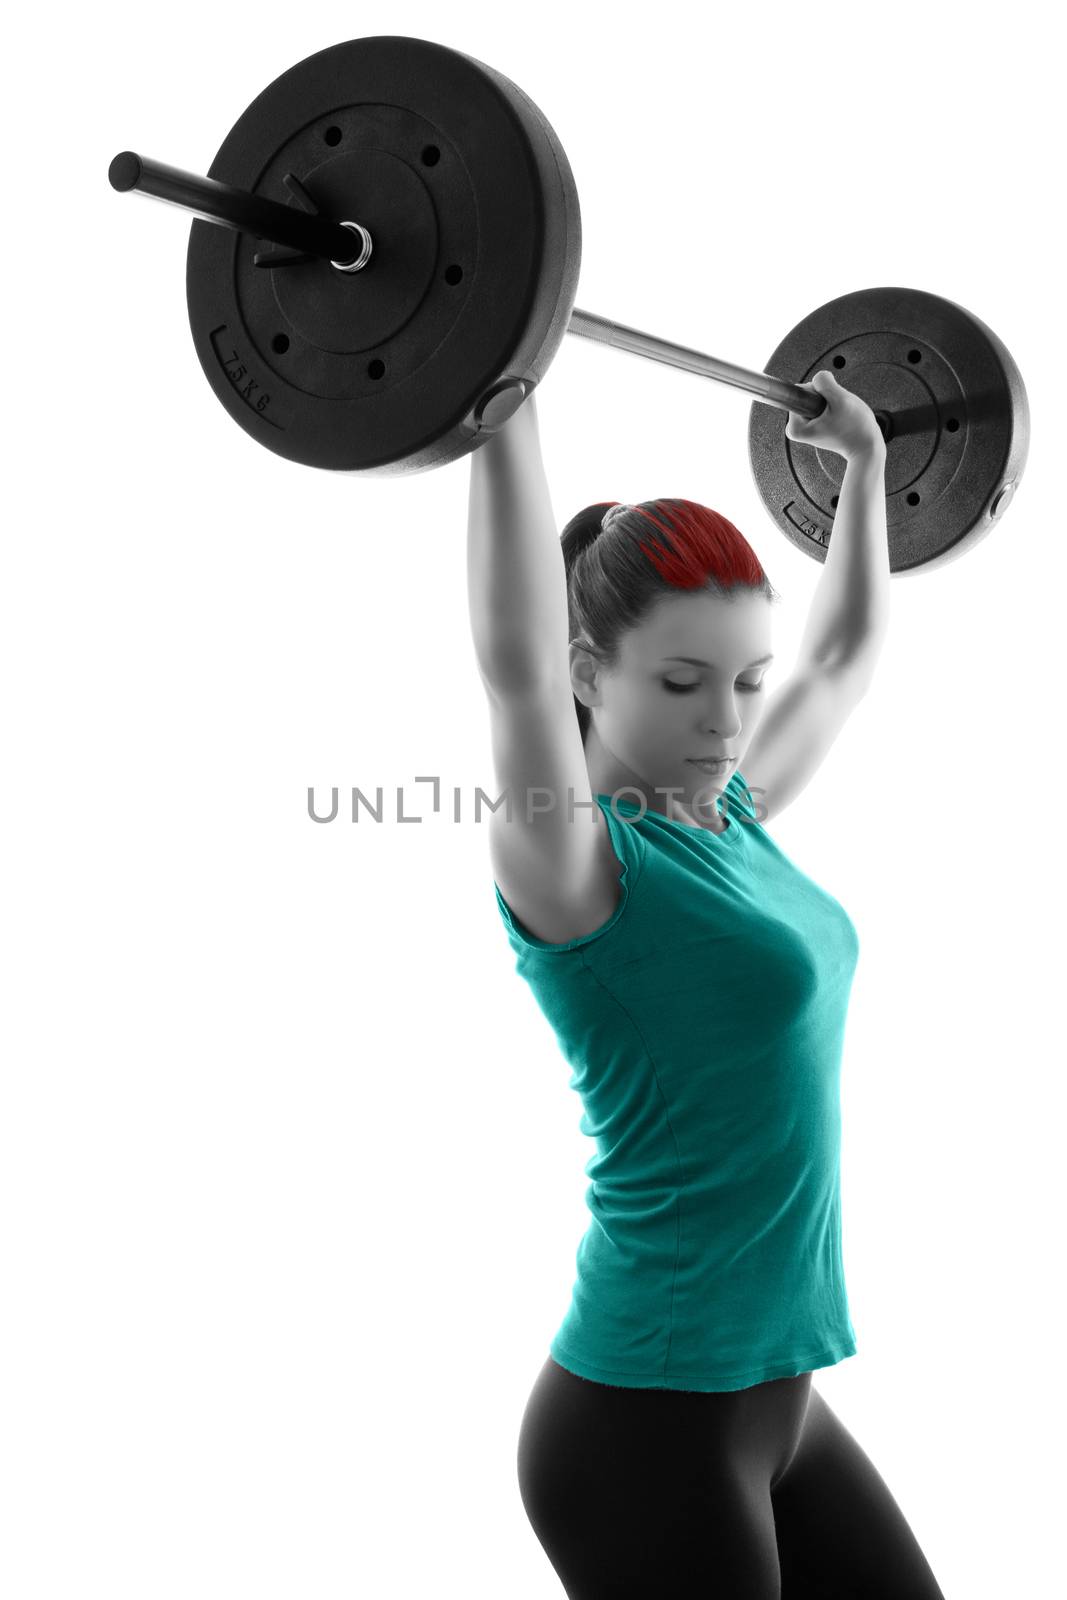 Fit attractive young woman working out with a barbell, doing shoulder press, backlit silhouette studio shot isolated on white background. Fitness and healthy lifestyle concept.